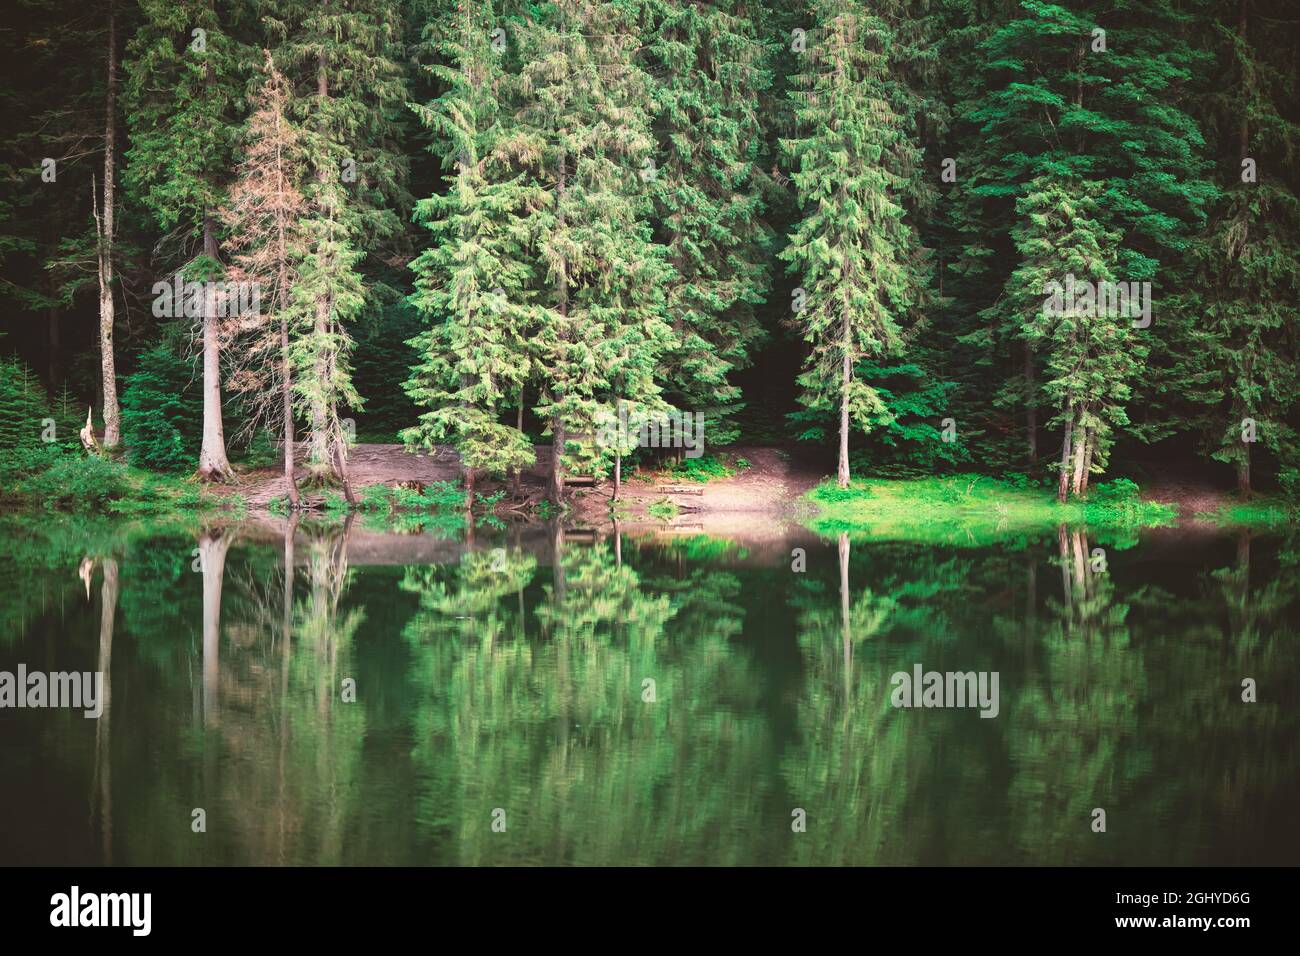 Clear water in a forest lake with pine trees. Landscape photography Stock Photo